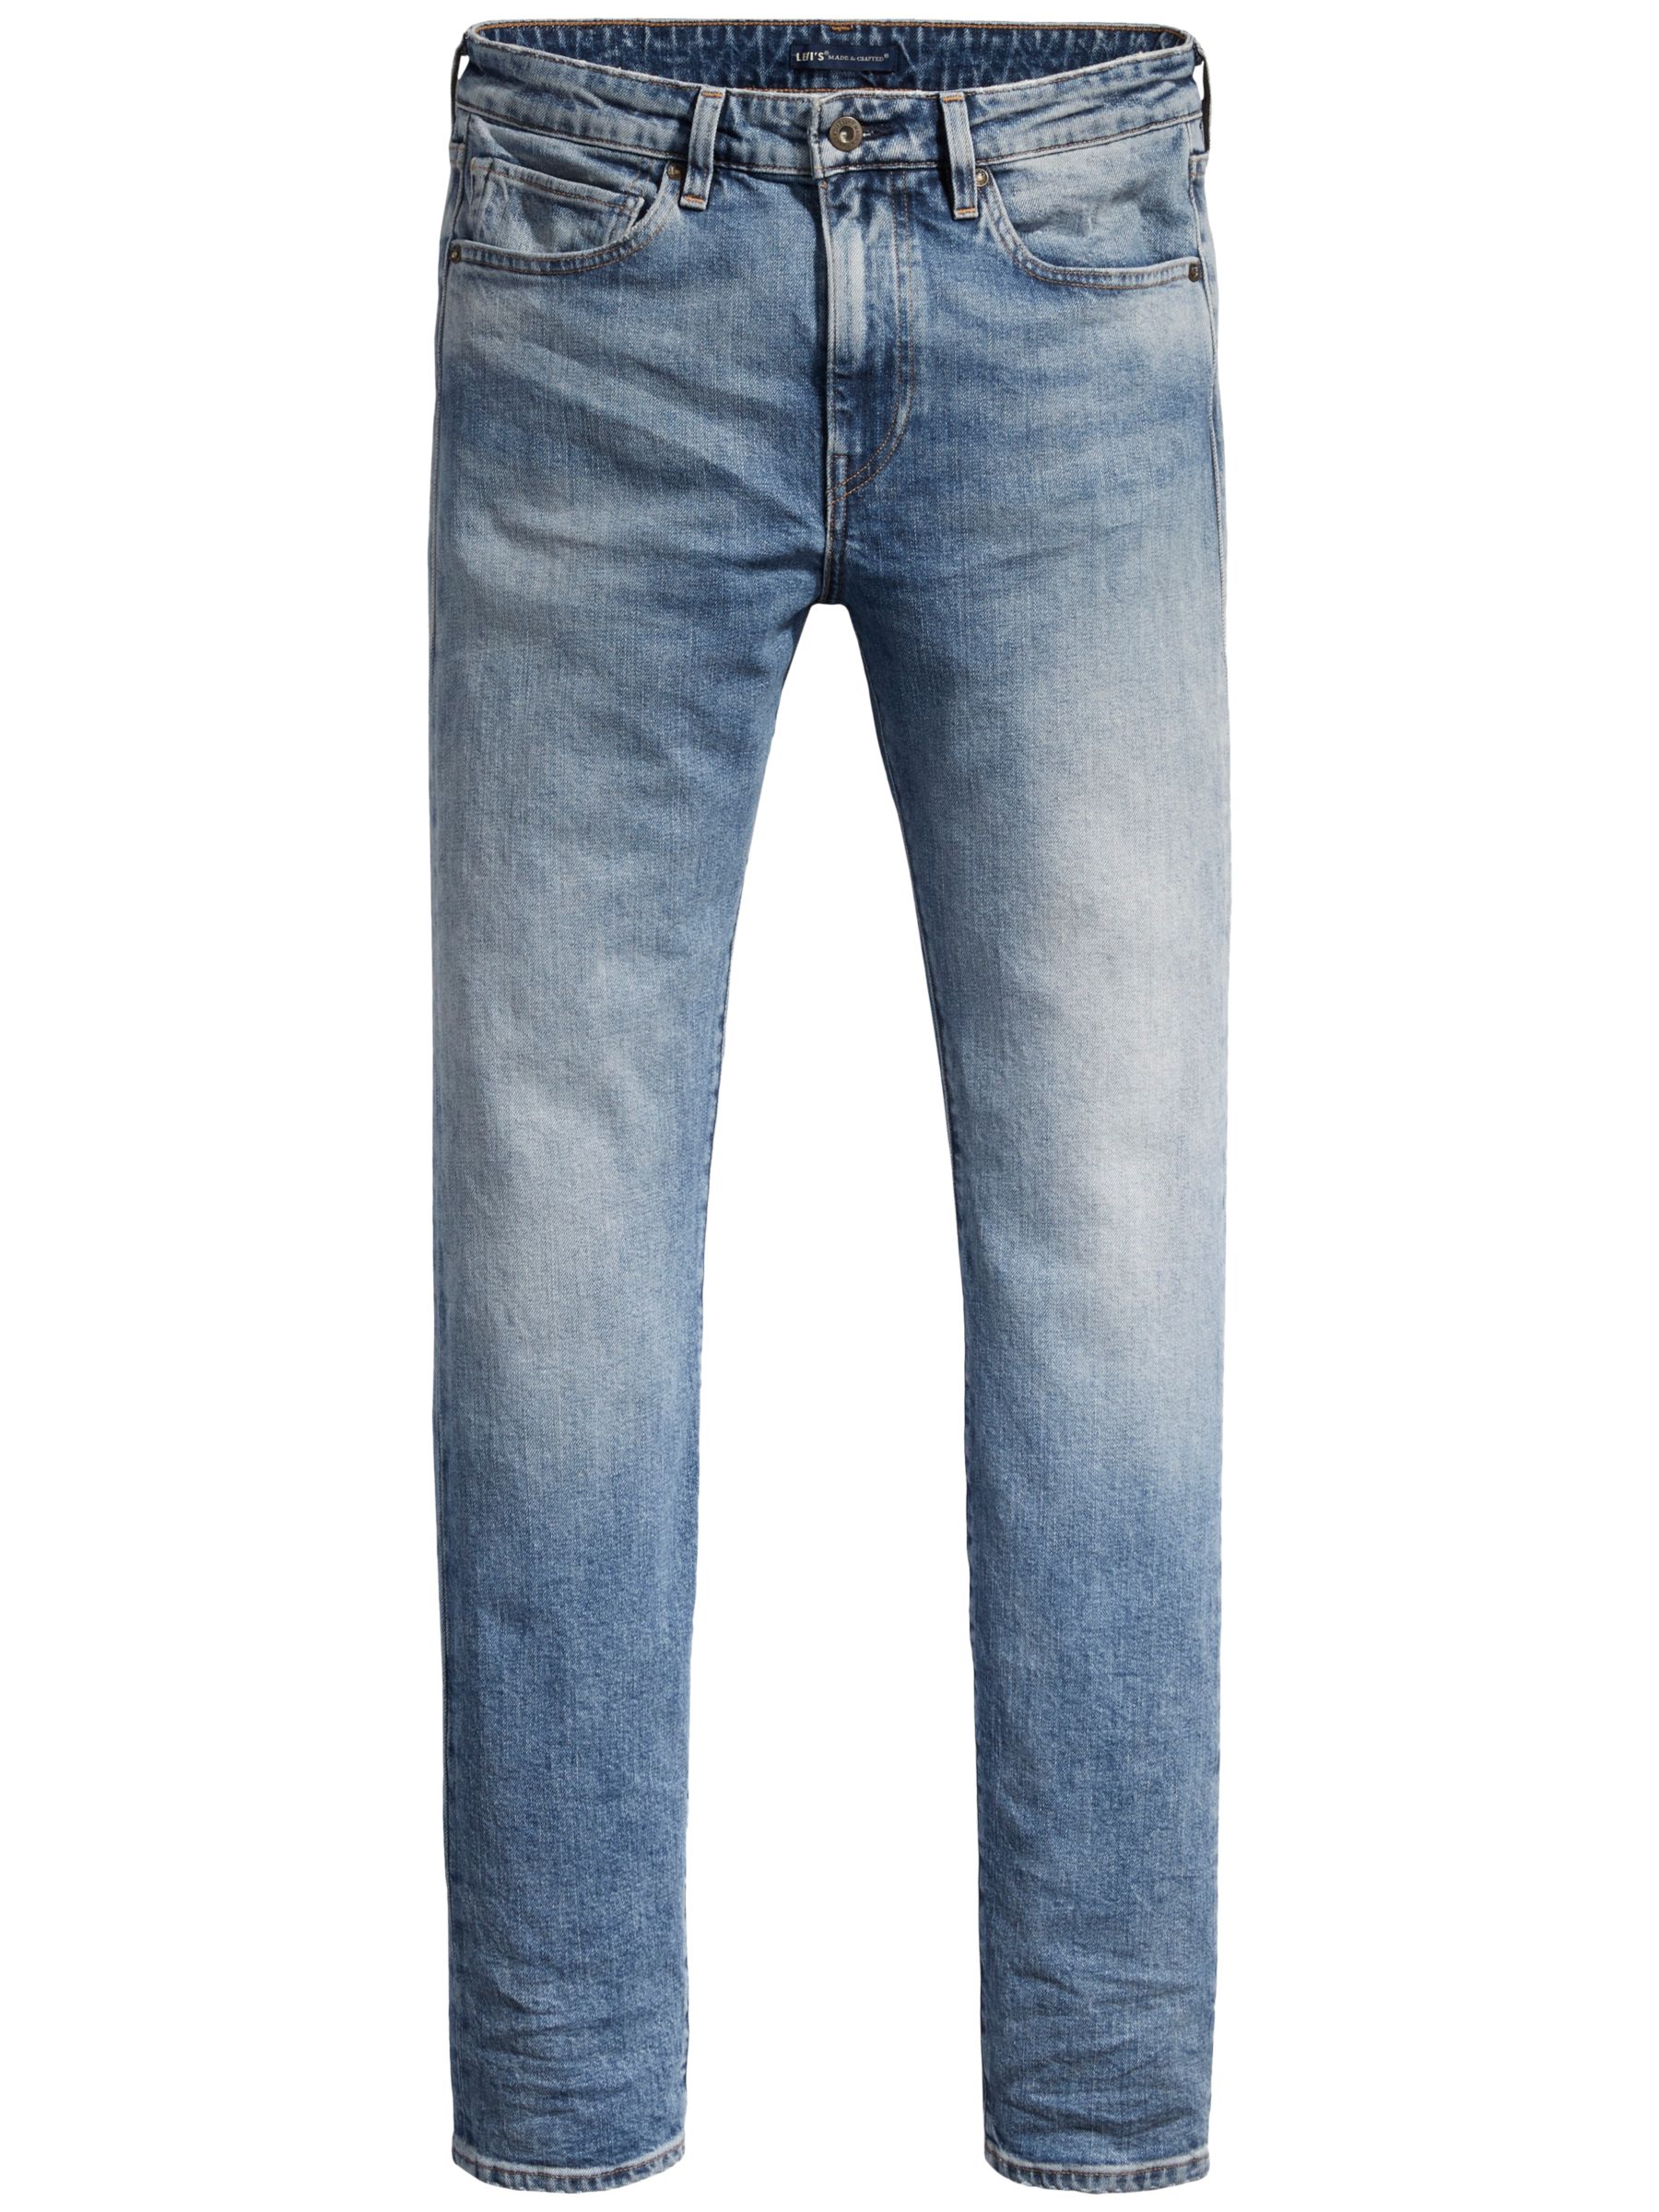 Levi's Made & Crafted Needle Narrow Fit Jeans, Rollers